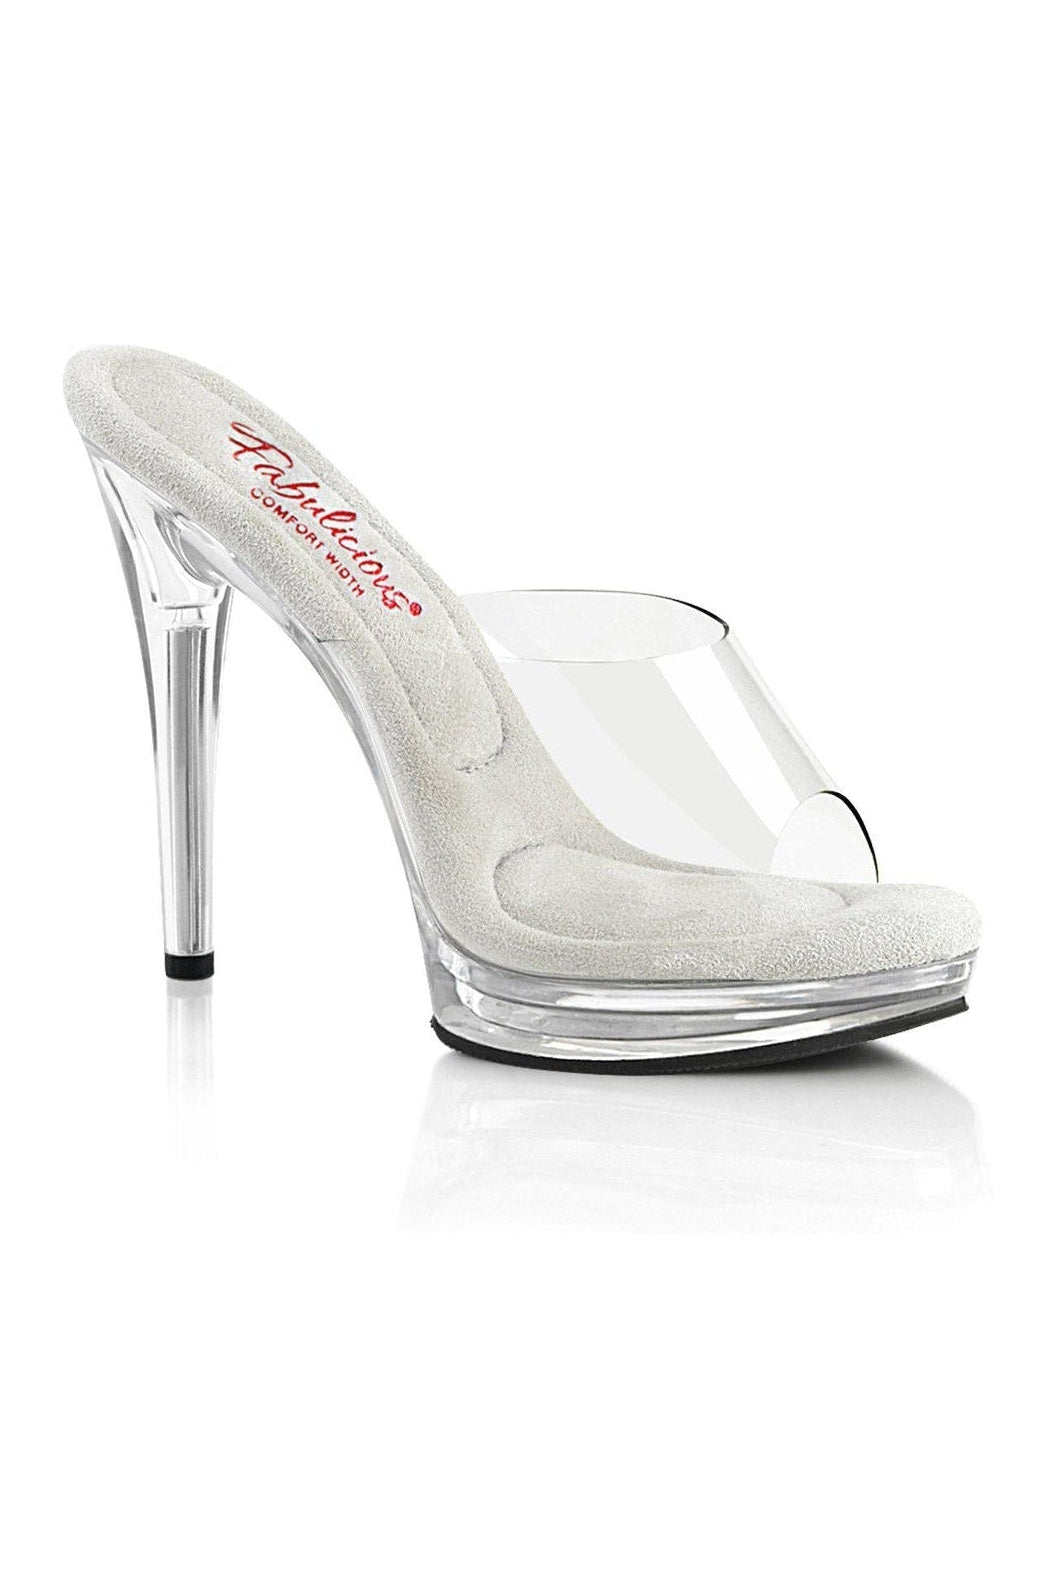 GLORY-501 Slide | Clear Vinyl-Slides-Fabulicious-Clear-10-Vinyl-SEXYSHOES.COM